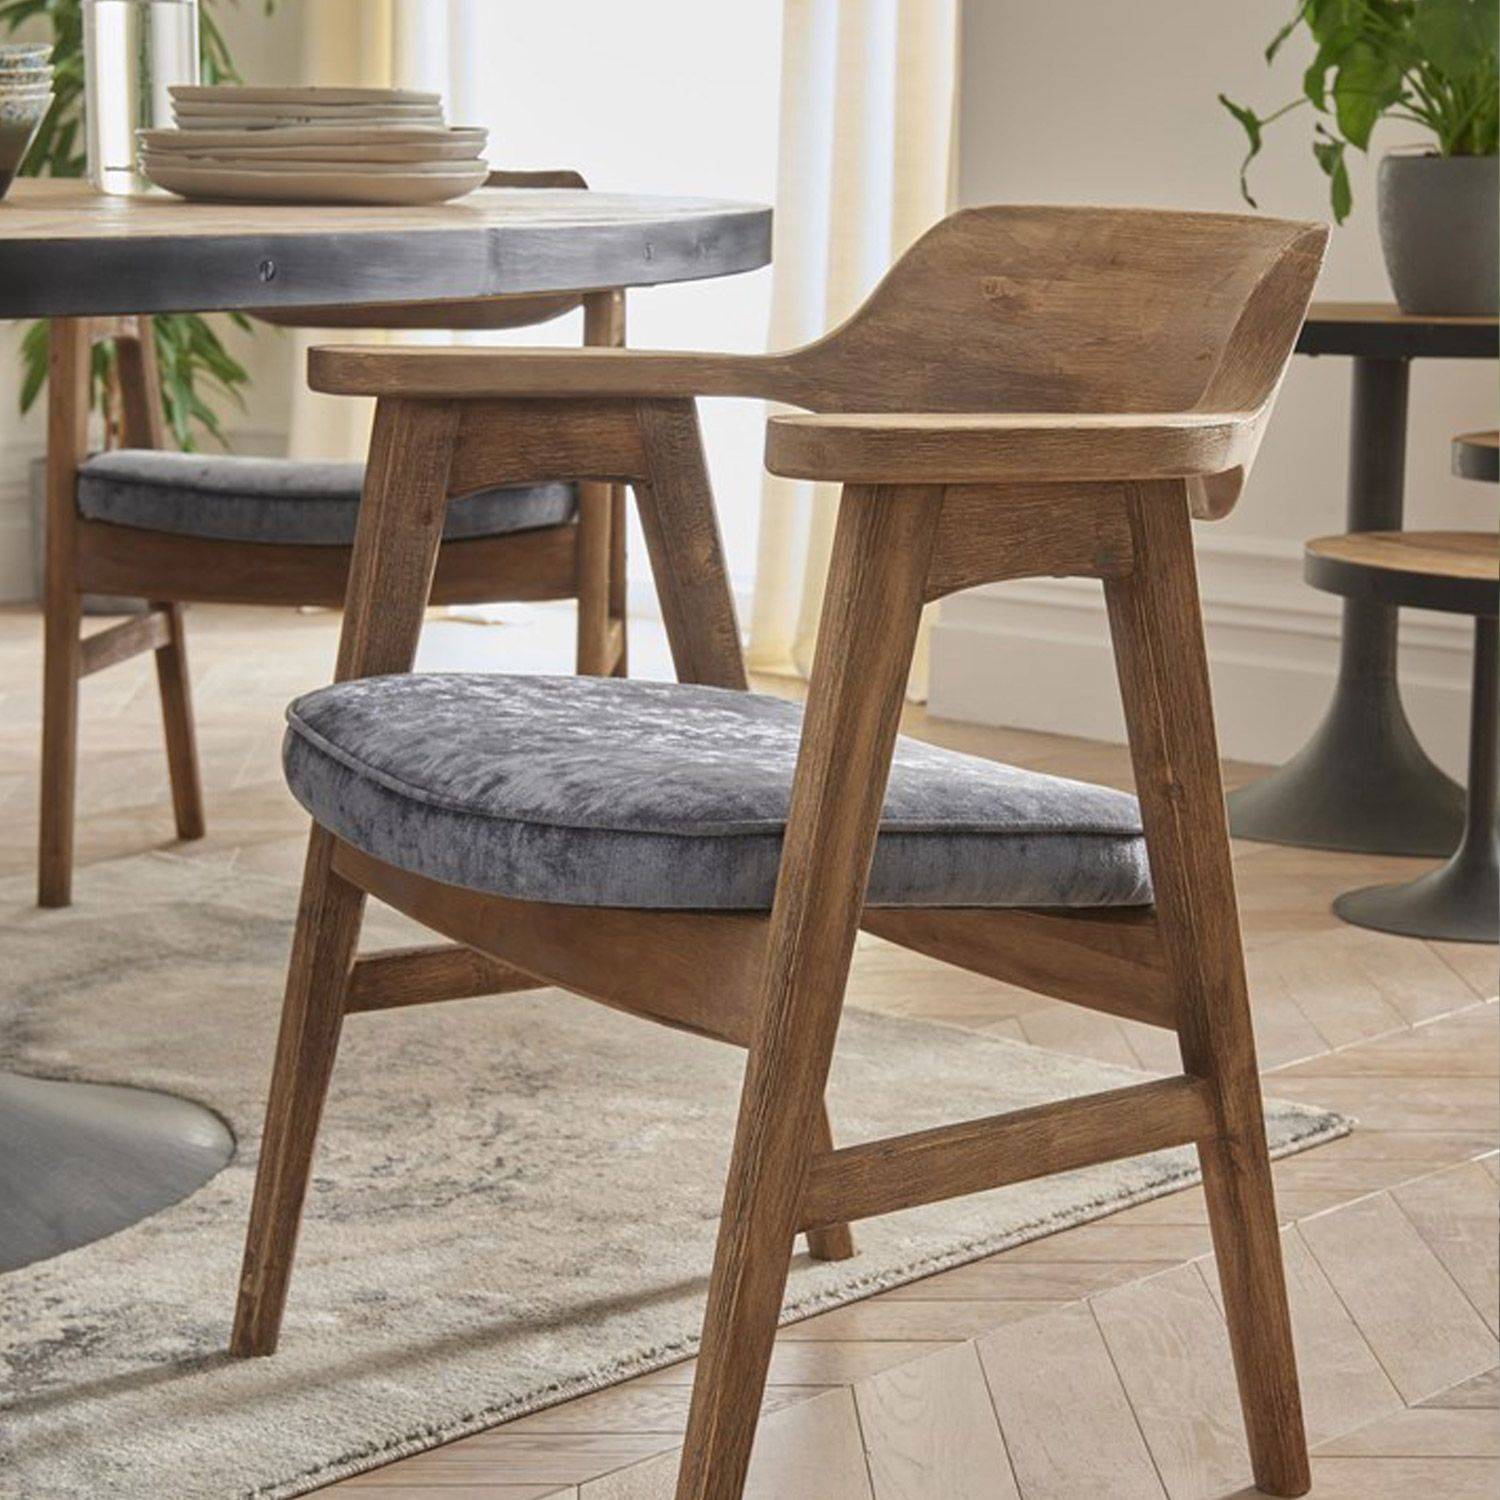 Our Brislington Dining Collection - Now Online